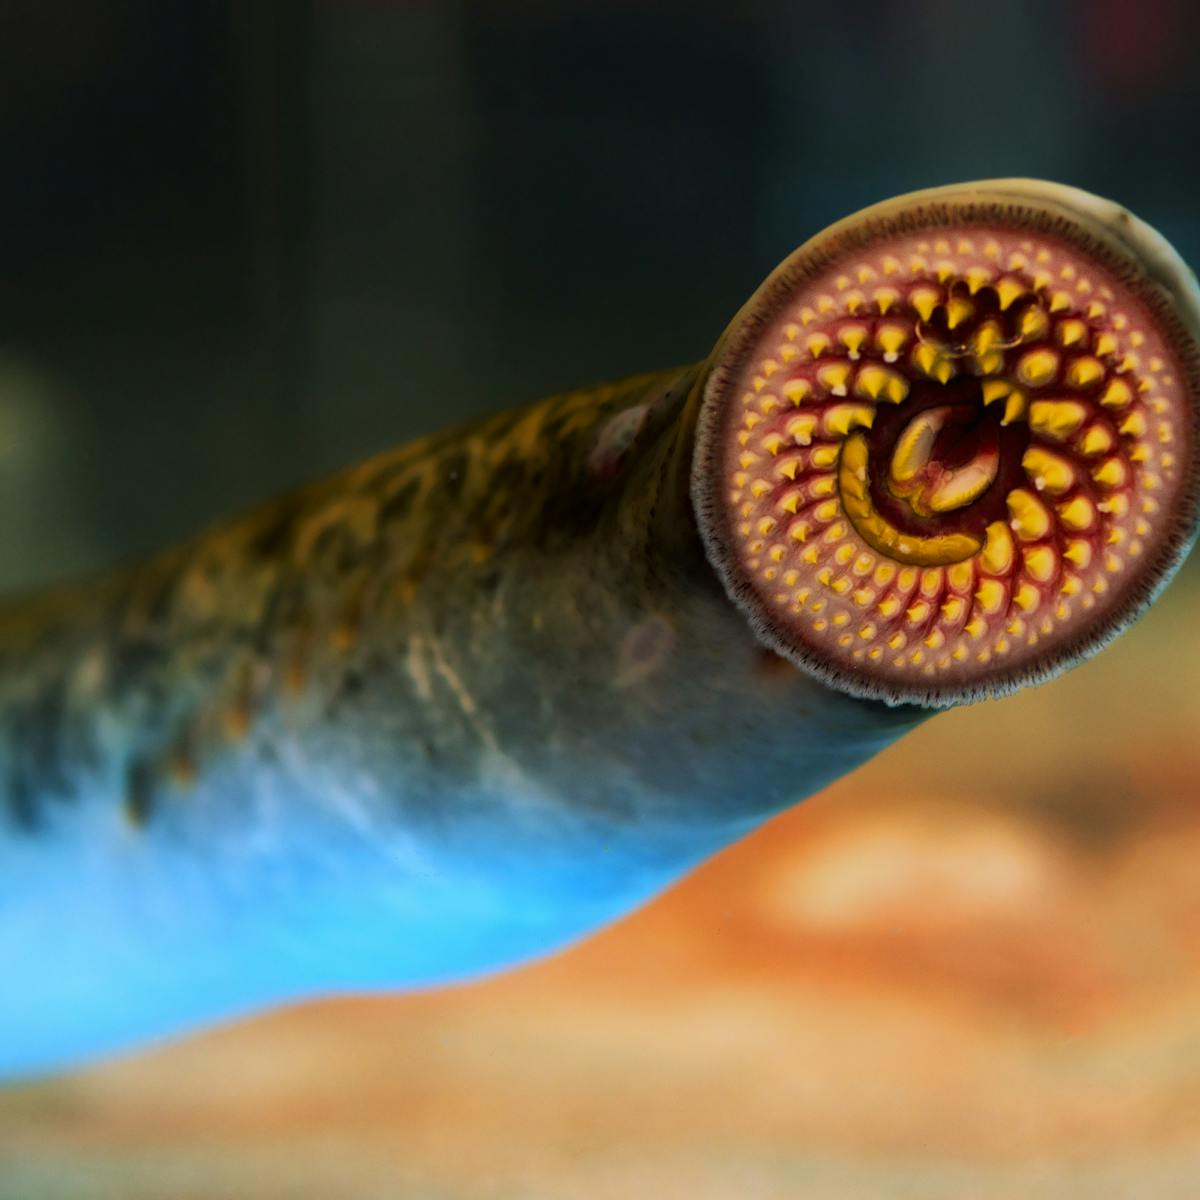 Vampire Fish Gorged On Great Lakes, What Are Lampreys Good For